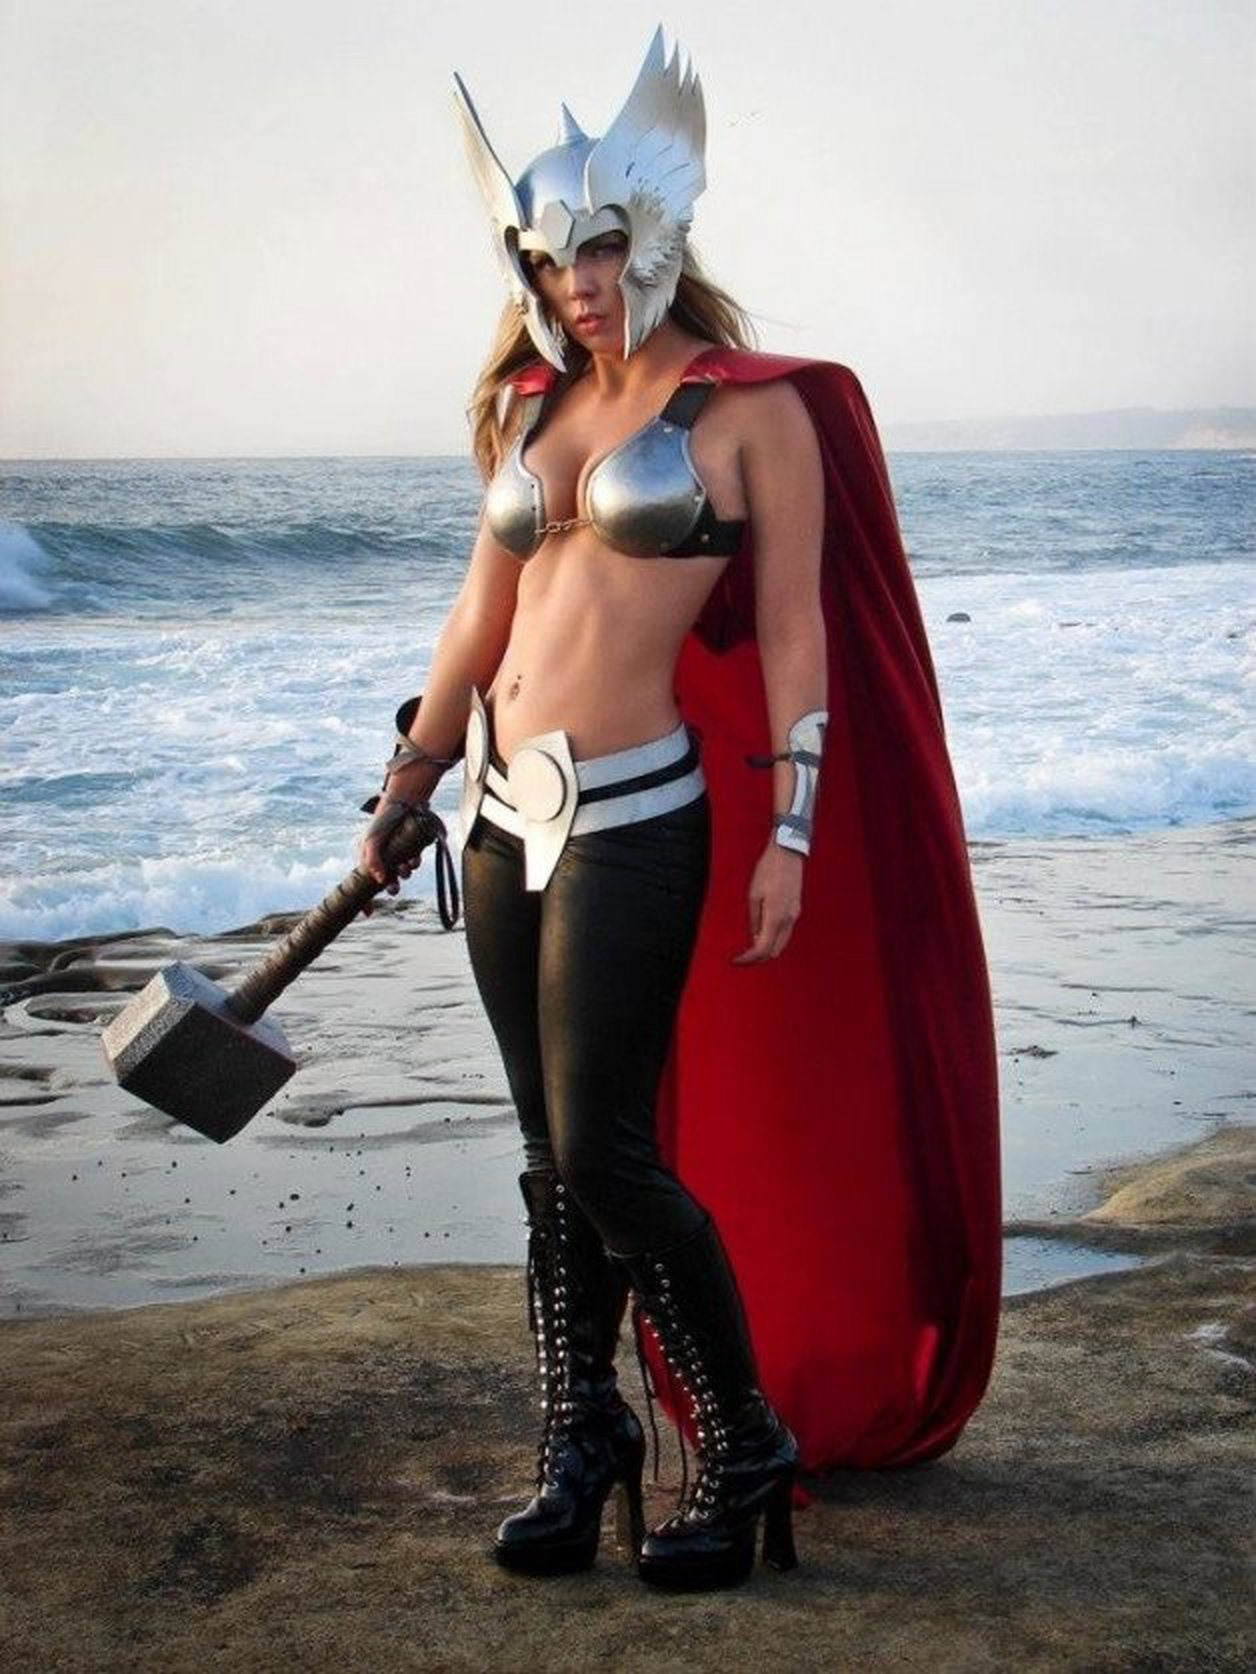 Photo by KarinaClarketv with the username @KarinaClarketv,  May 14, 2021 at 12:50 PM. The post is about the topic Fancy dress and sexy costumes and the text says 'Sexy #thor #cosplay'